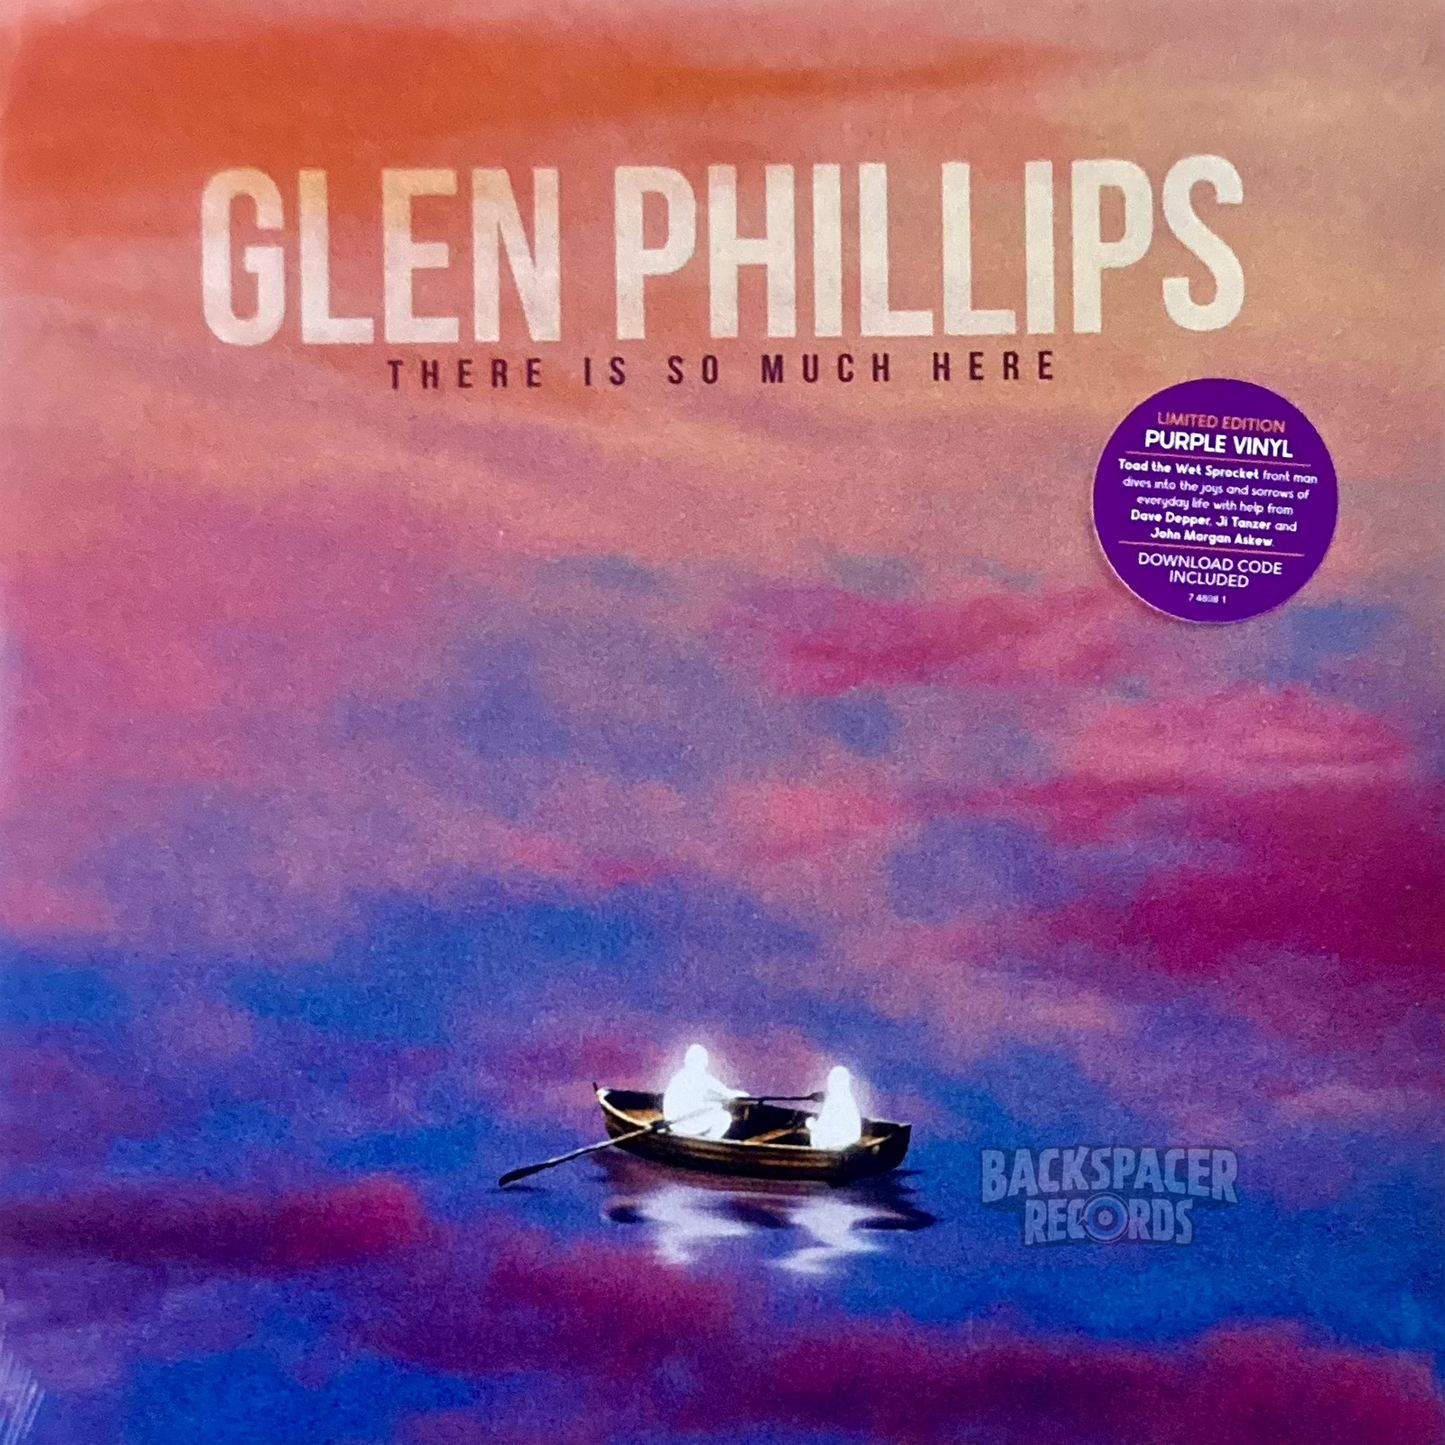 Glen Phillips – There Is So Much Here (Limited Edition) LP (Sealed)